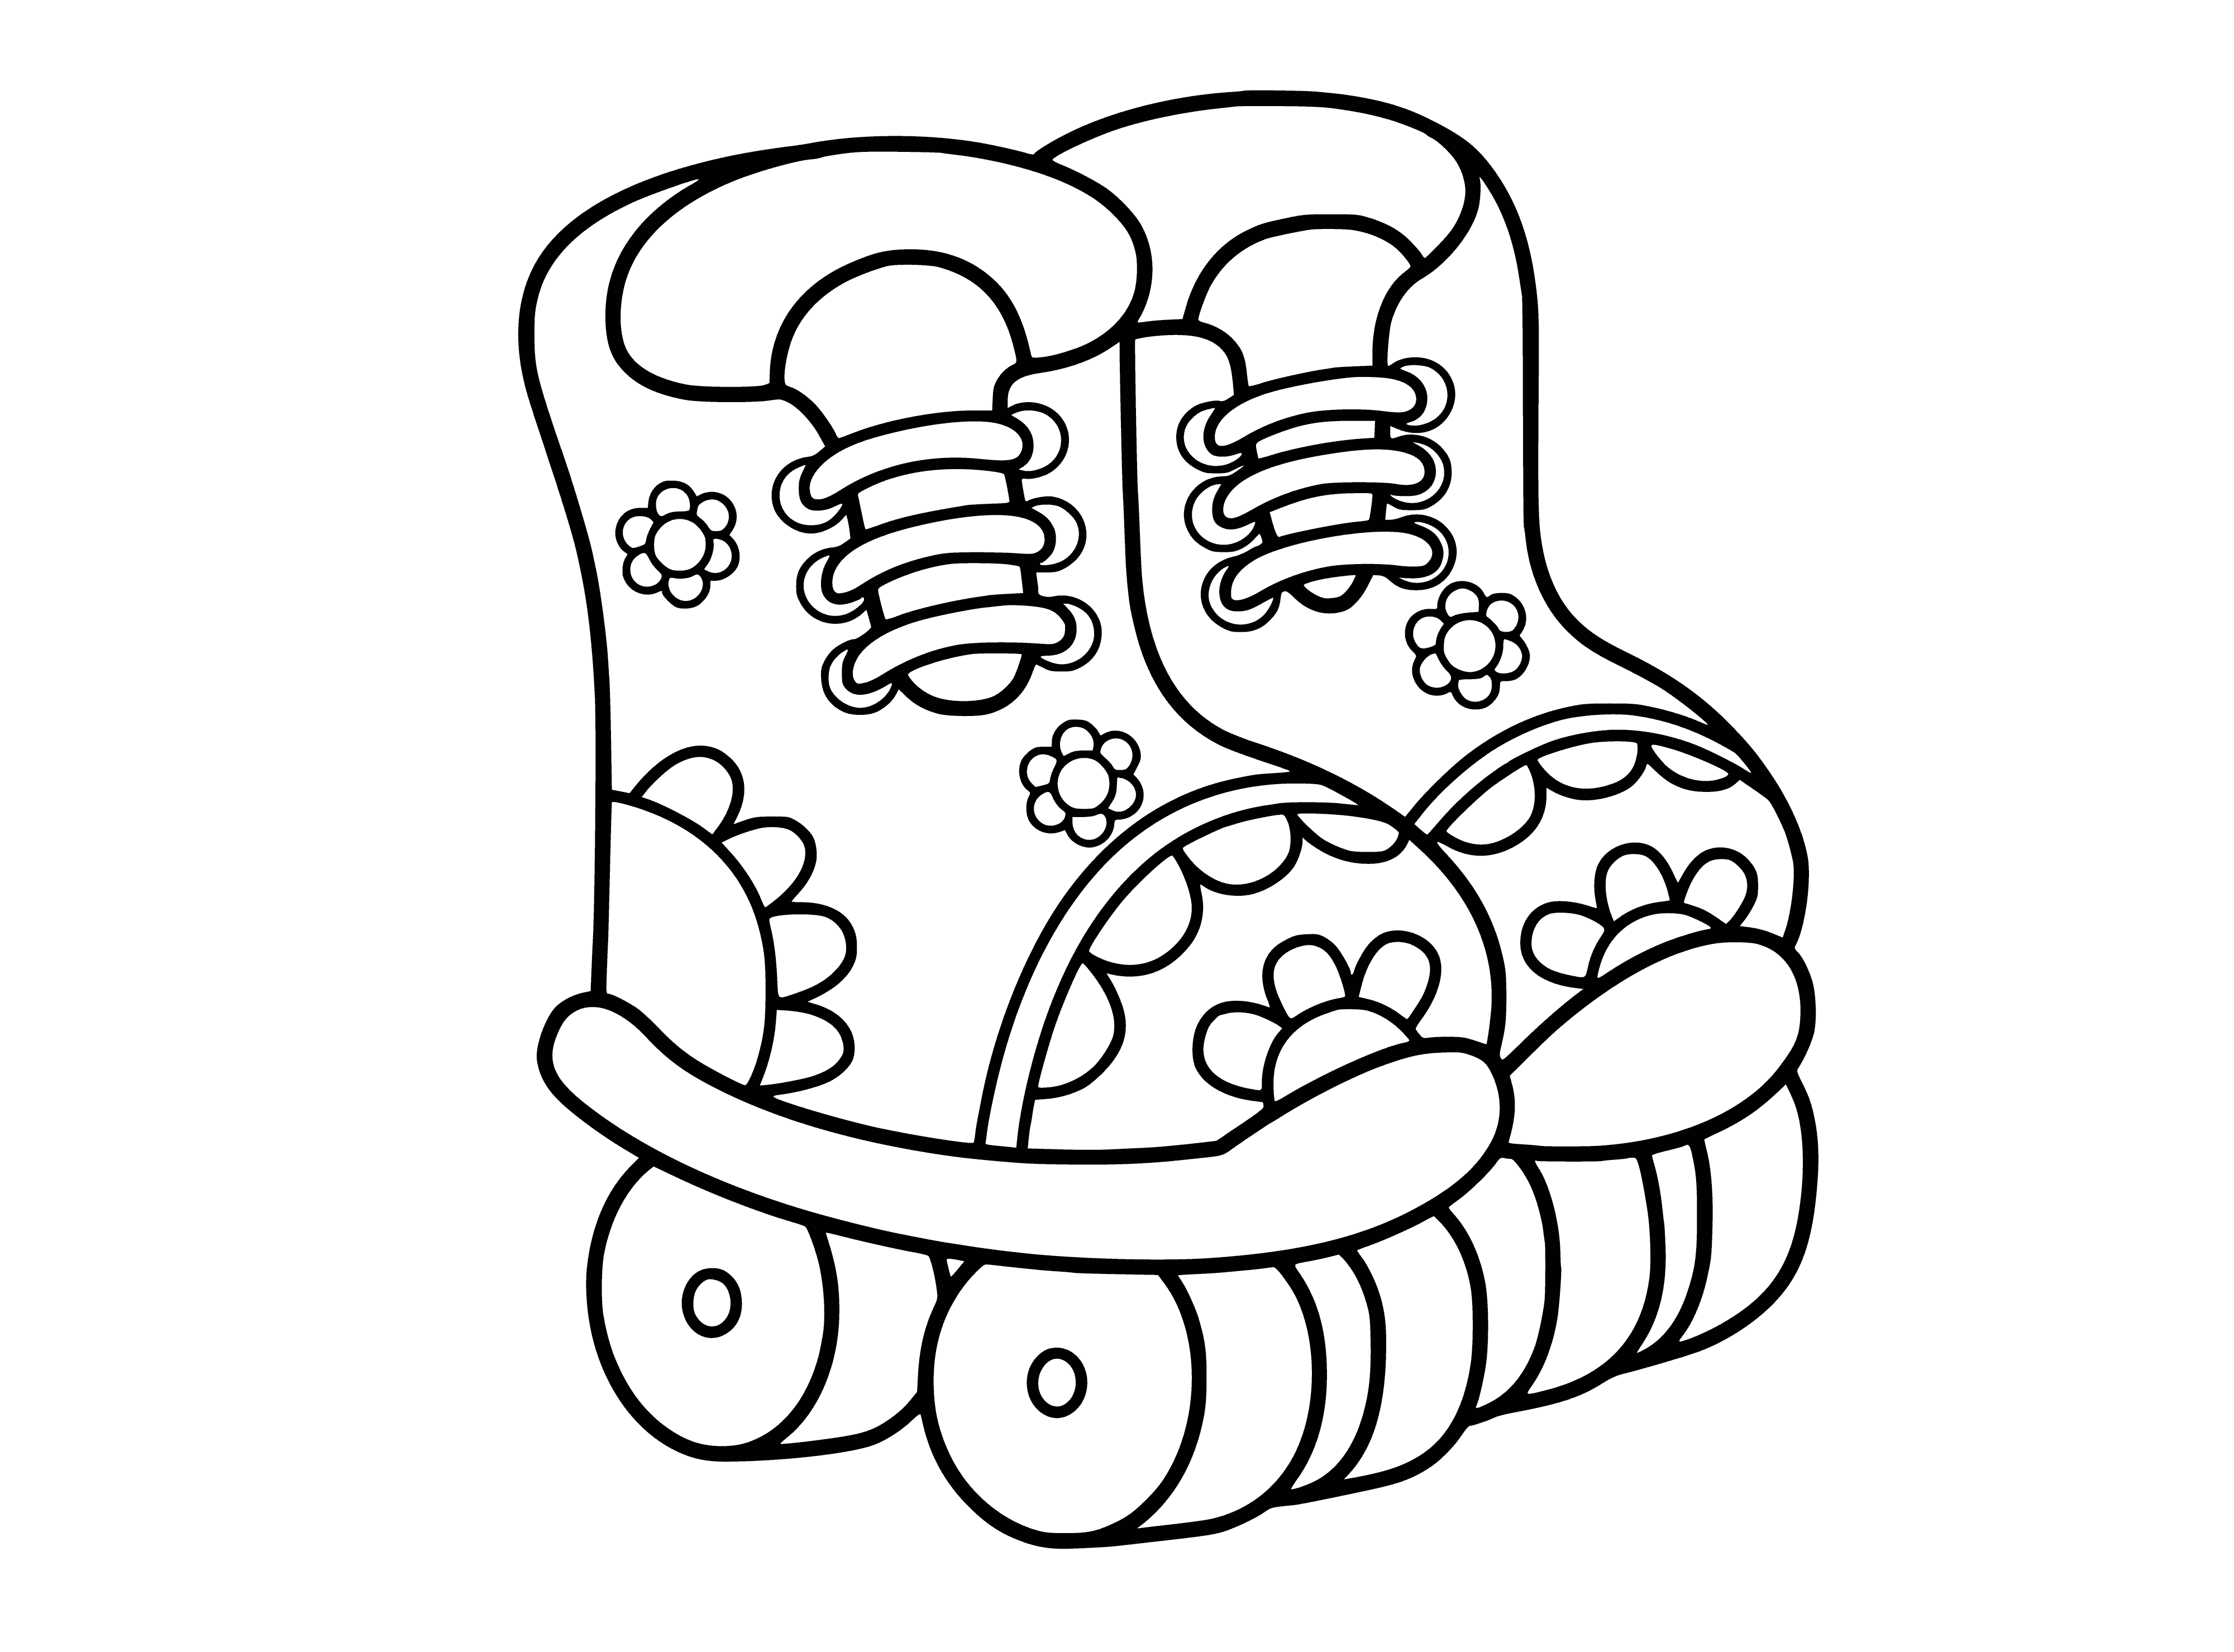 Roller skates coloring page